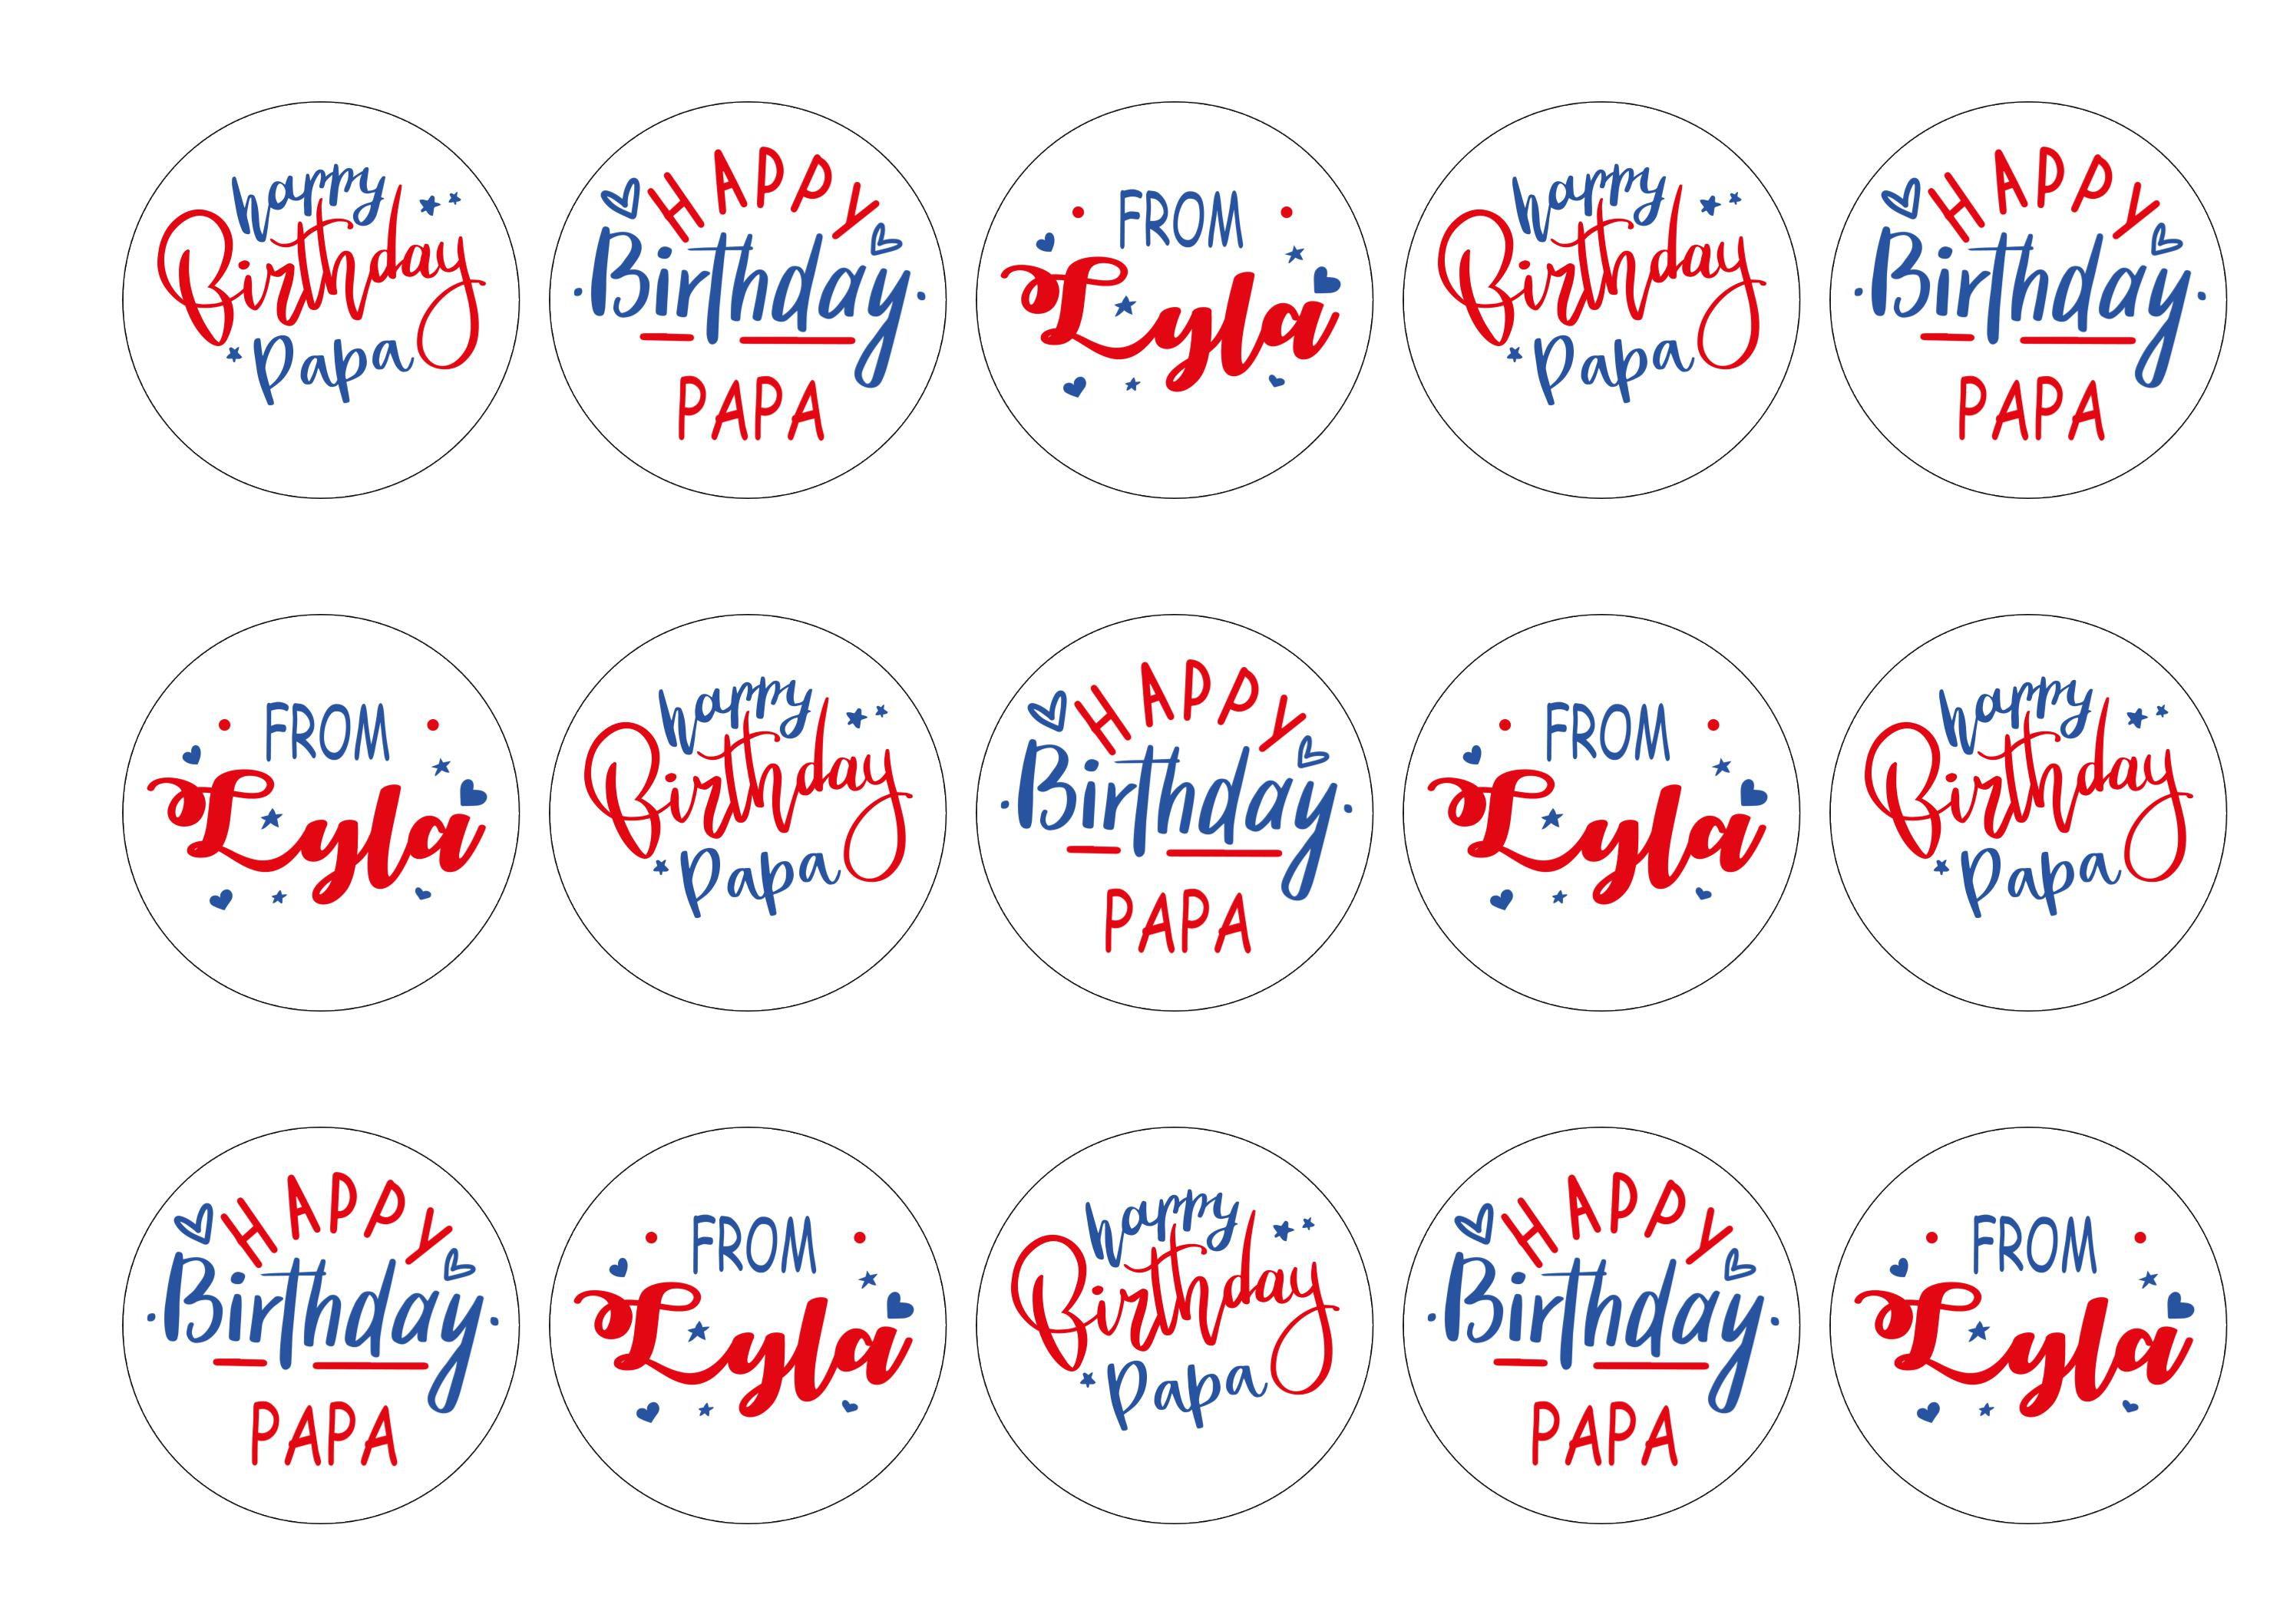 15 Personalised Birthday toppers with Happy Birthday Papa messages